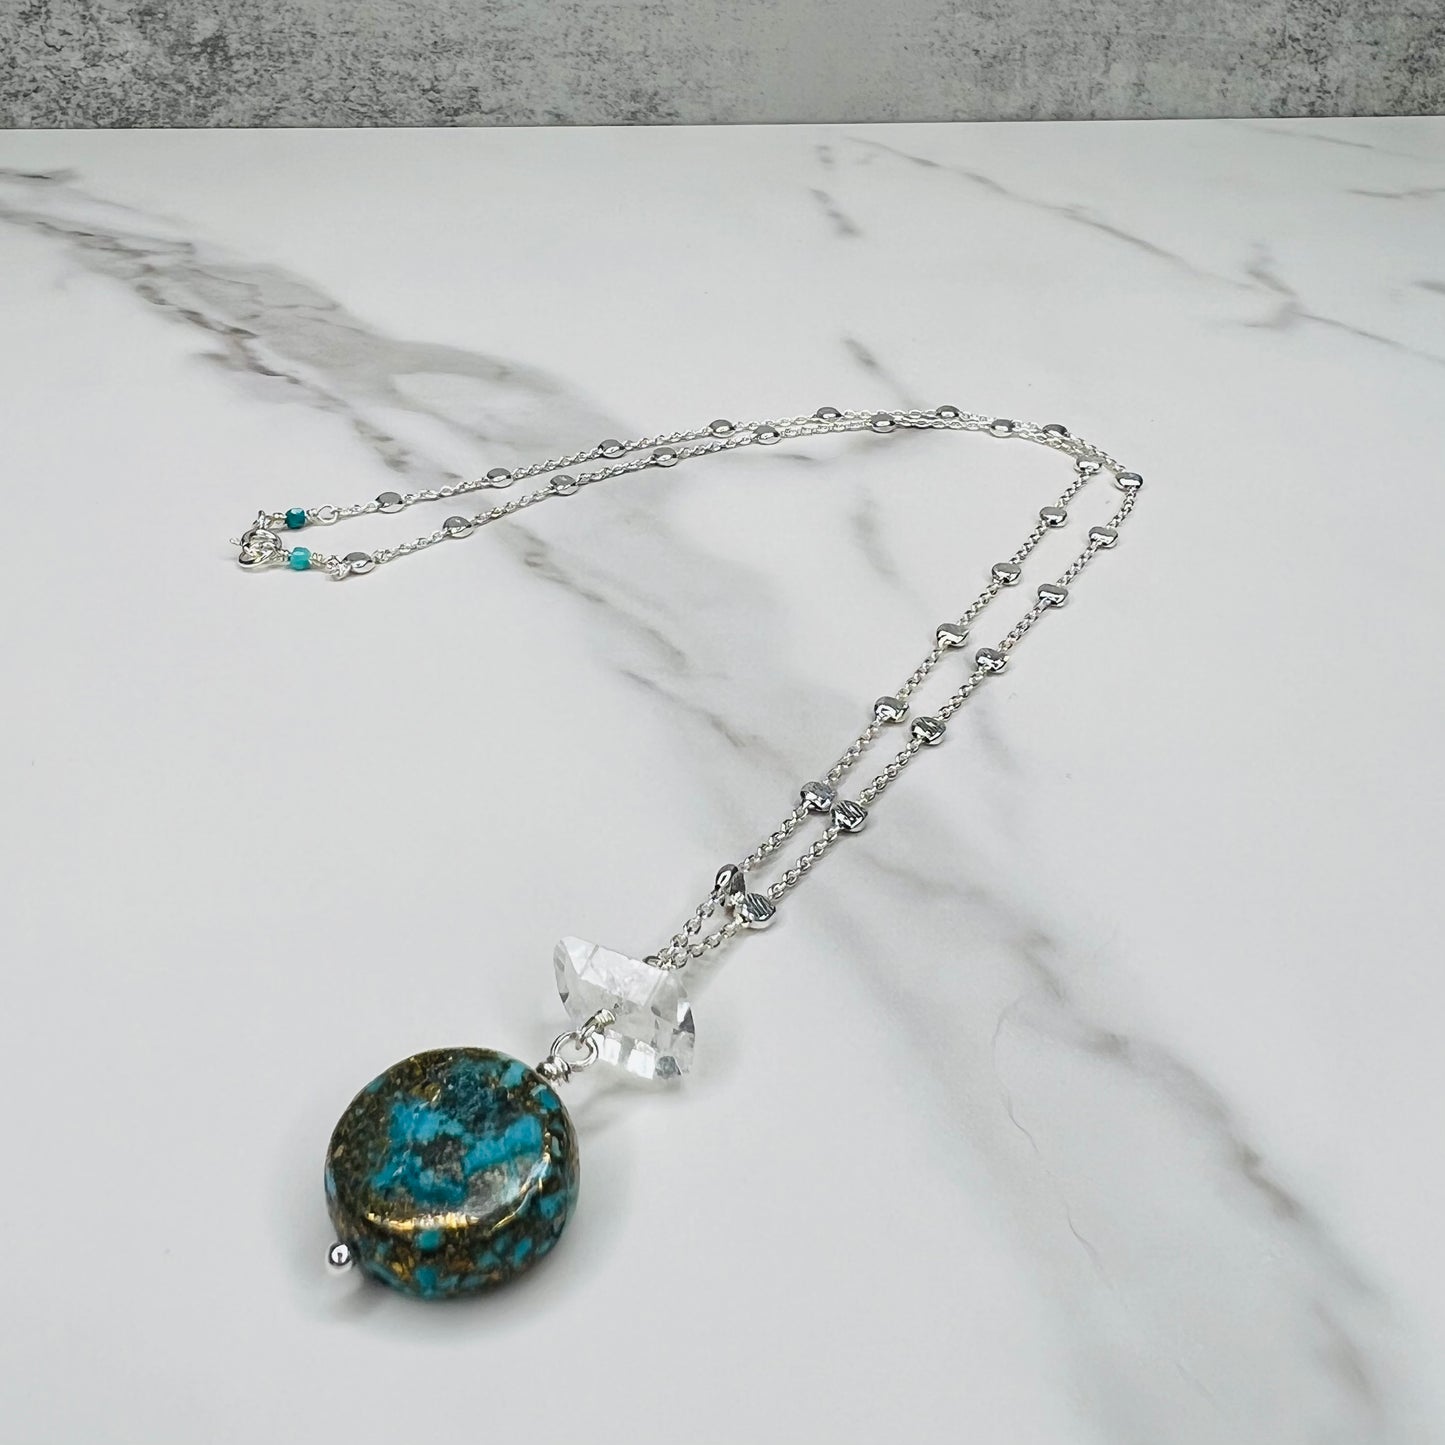 Turquoise Coin Pendant Necklace